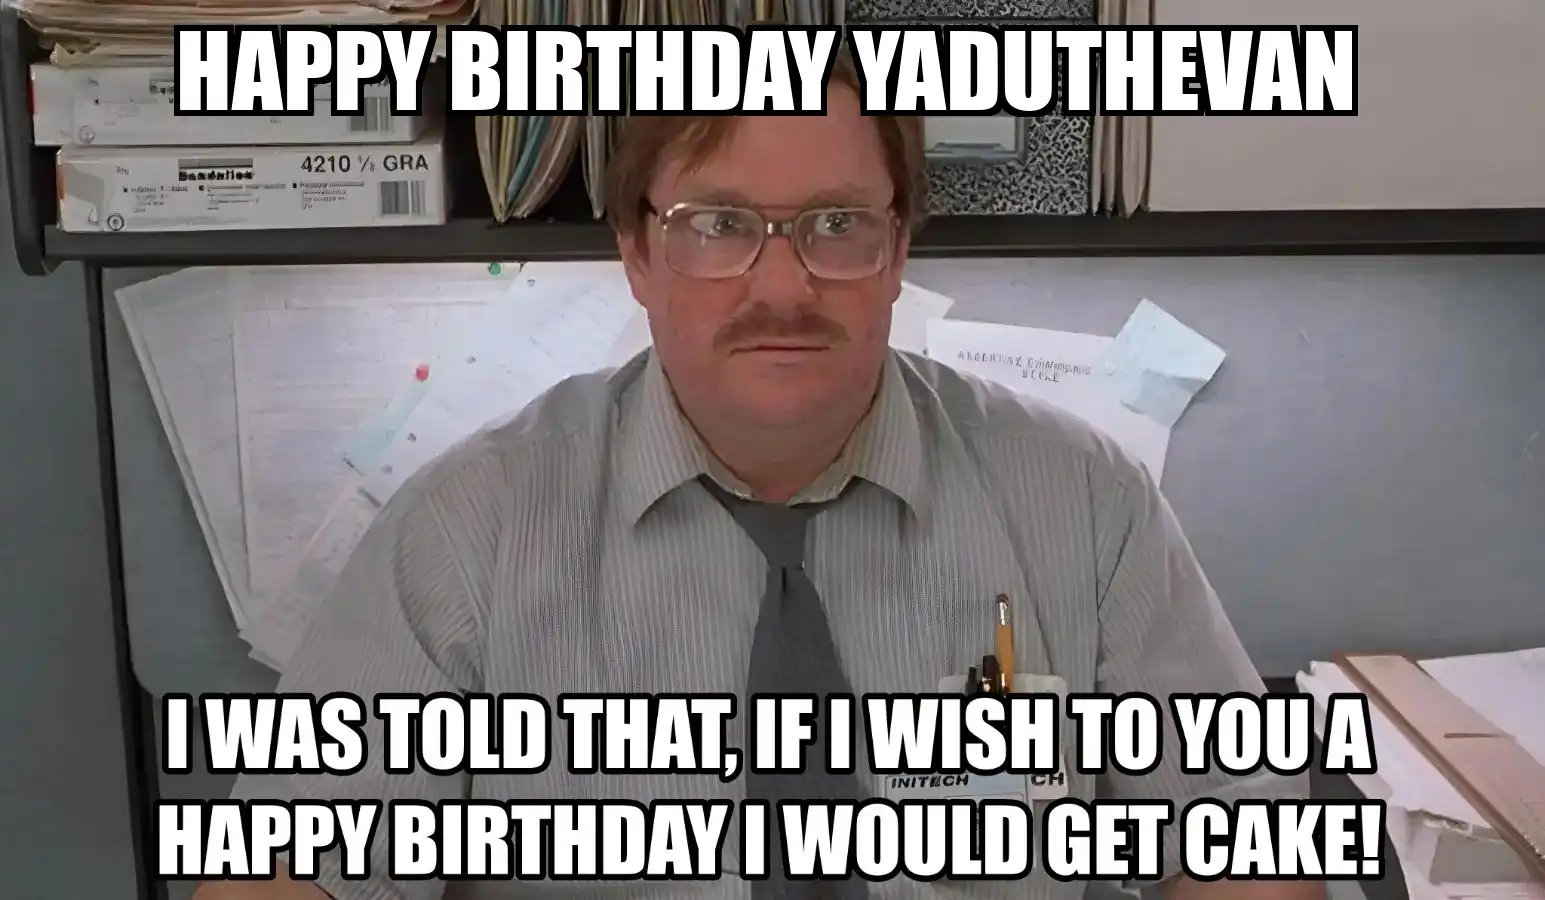 Happy Birthday Yaduthevan I Would Get A Cake Meme